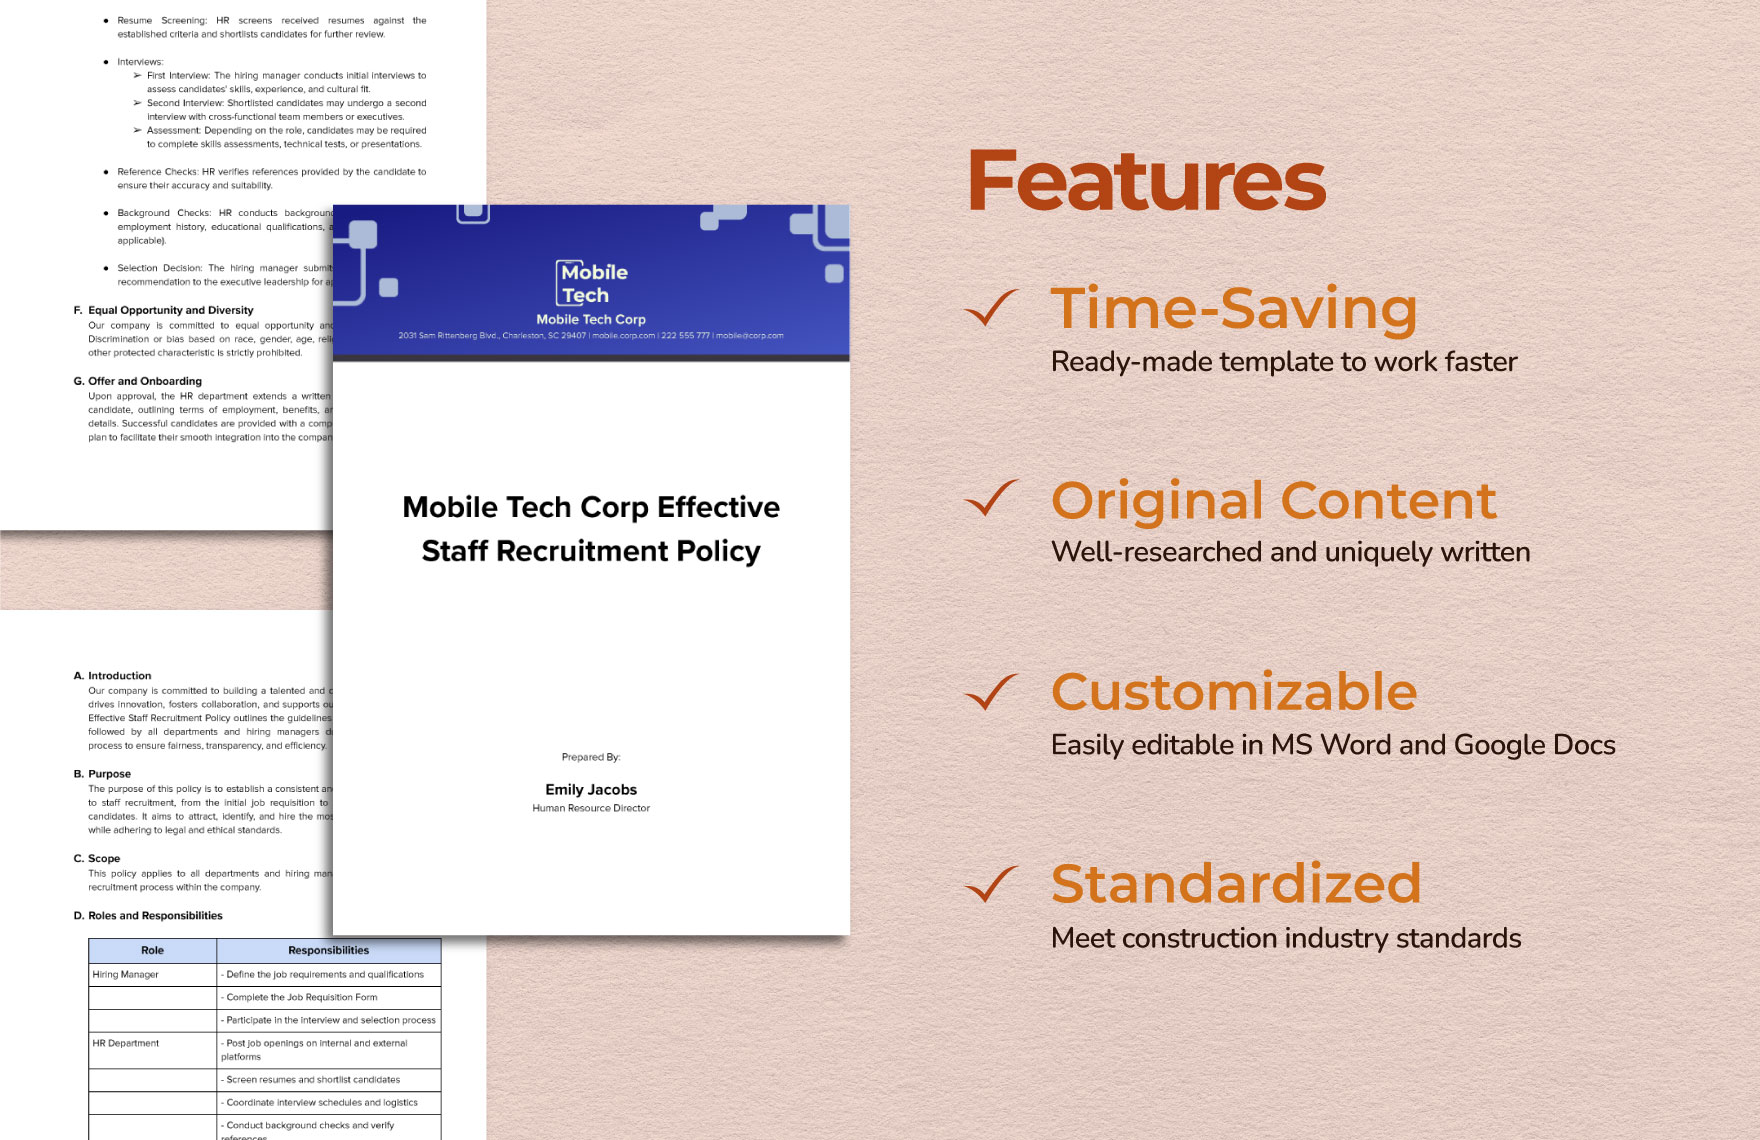 Effective Staff Recruitment Policy Template